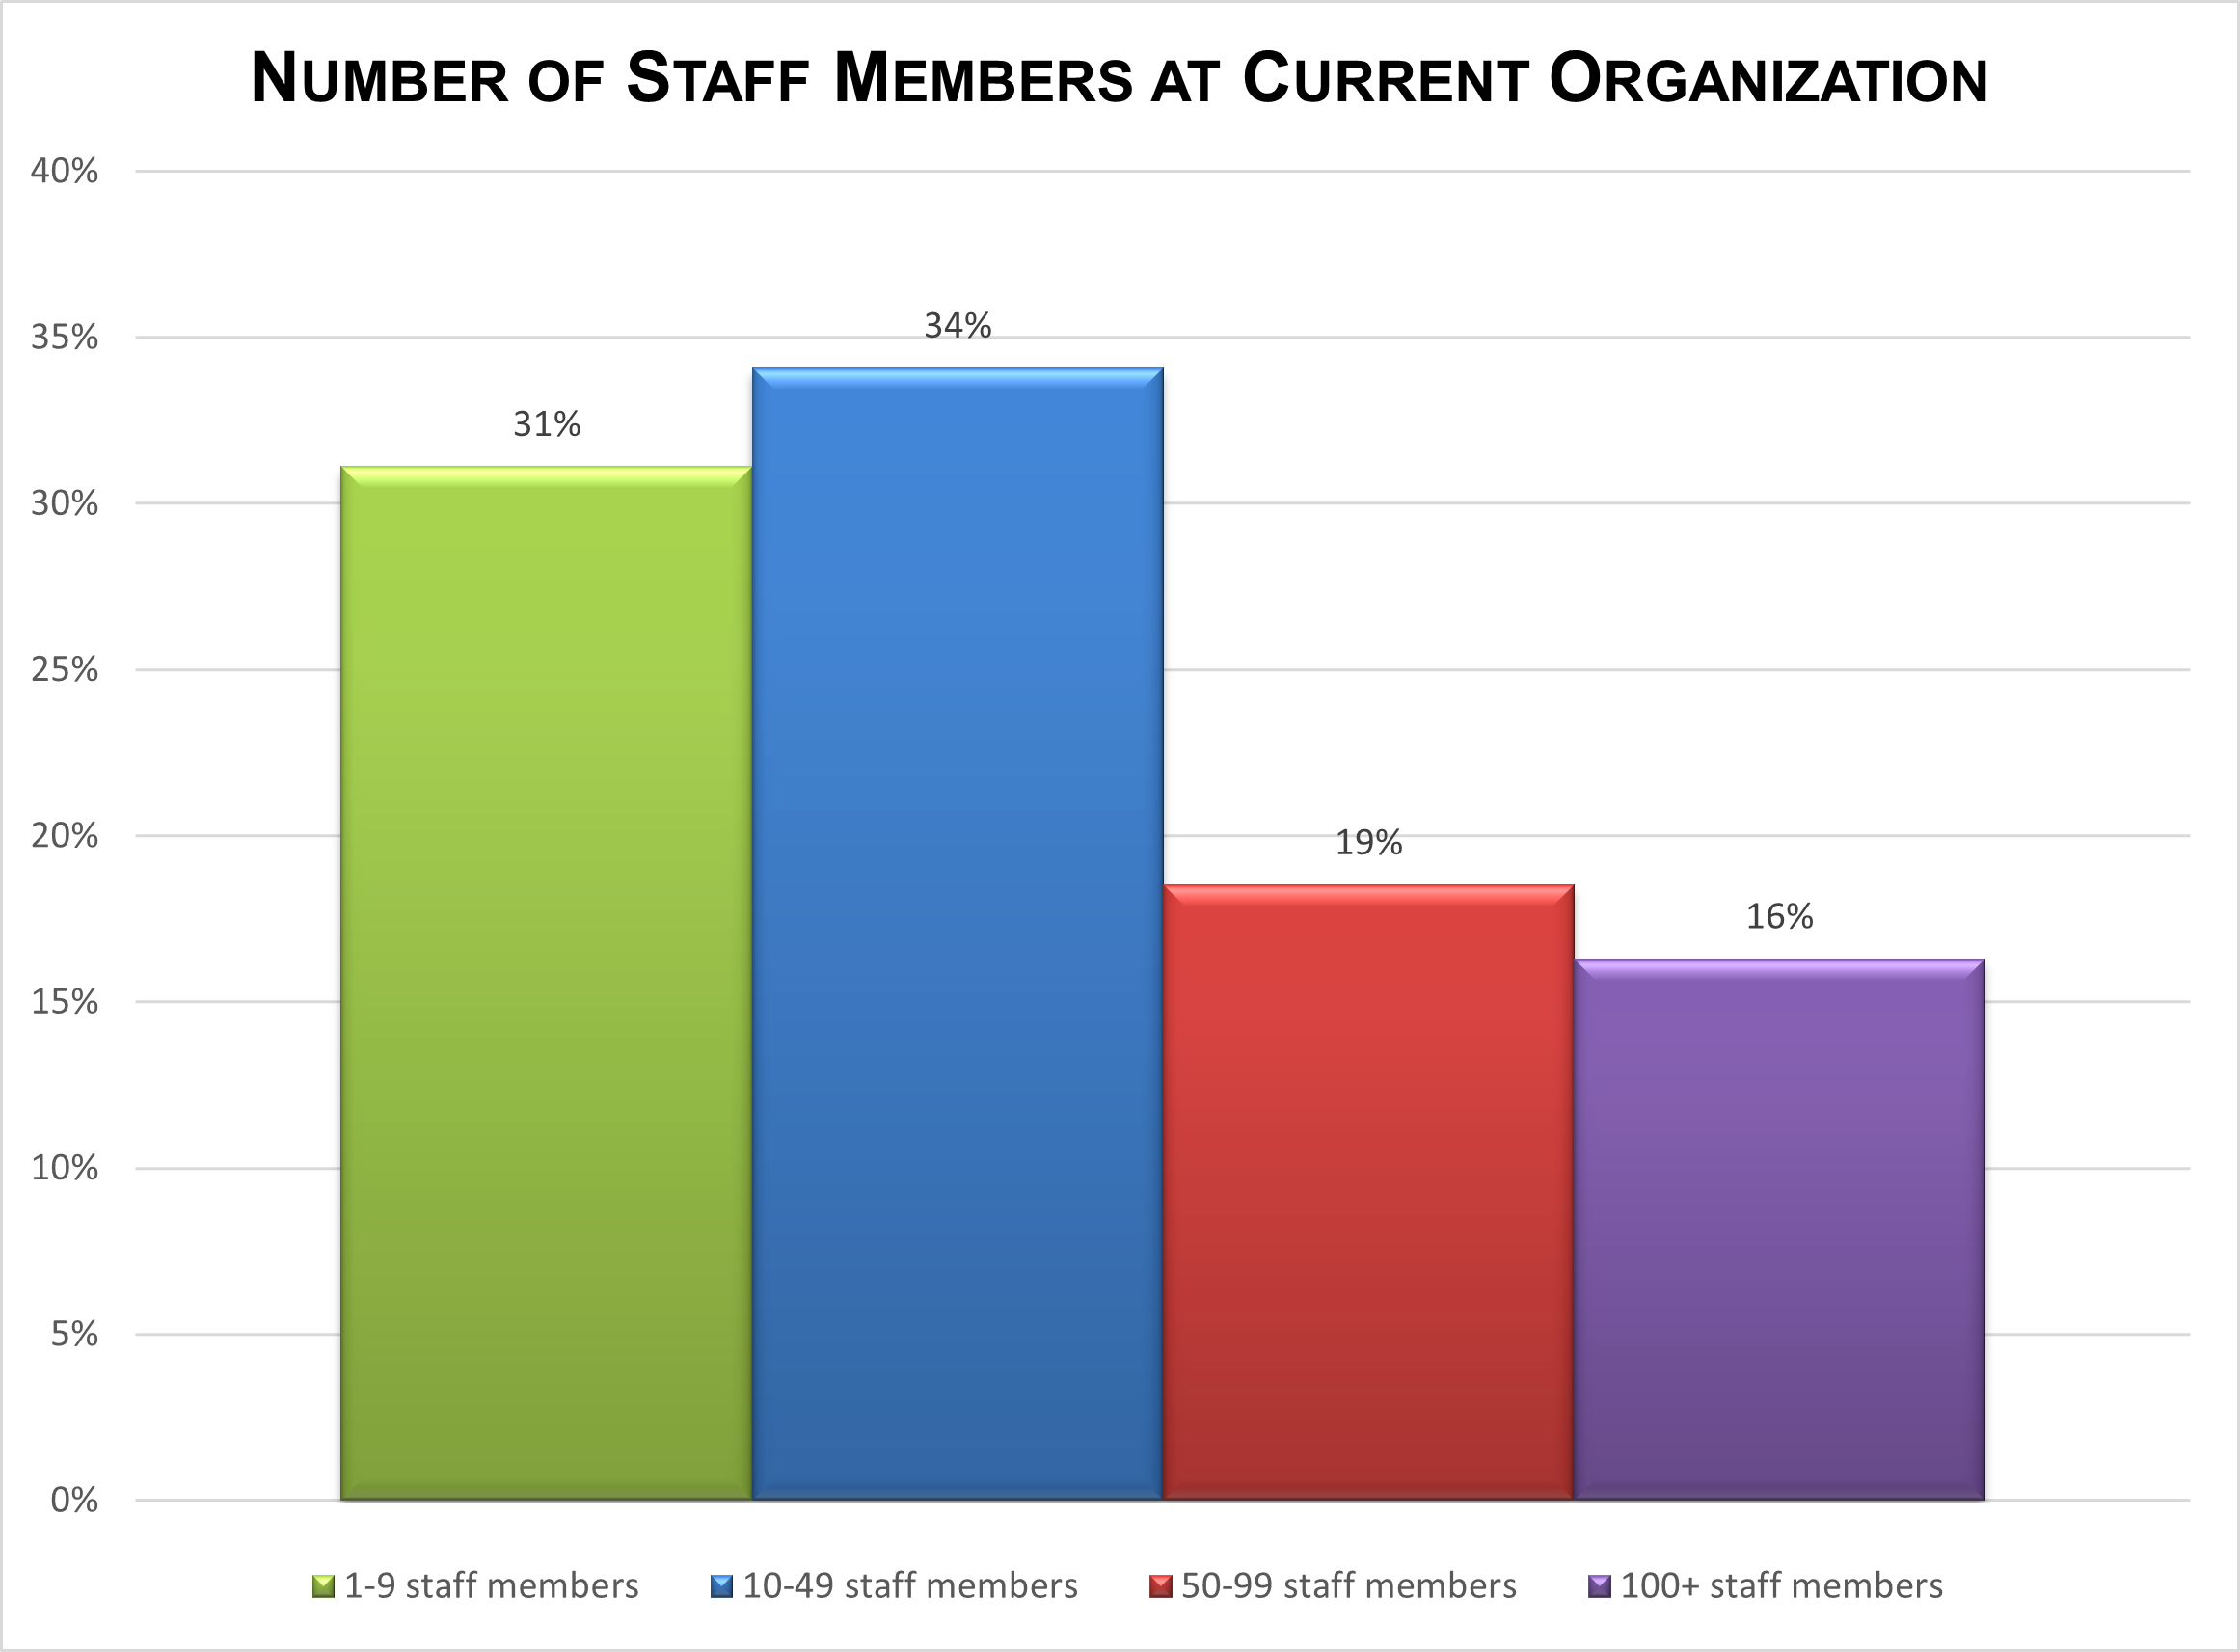 Number of staff members at current organization